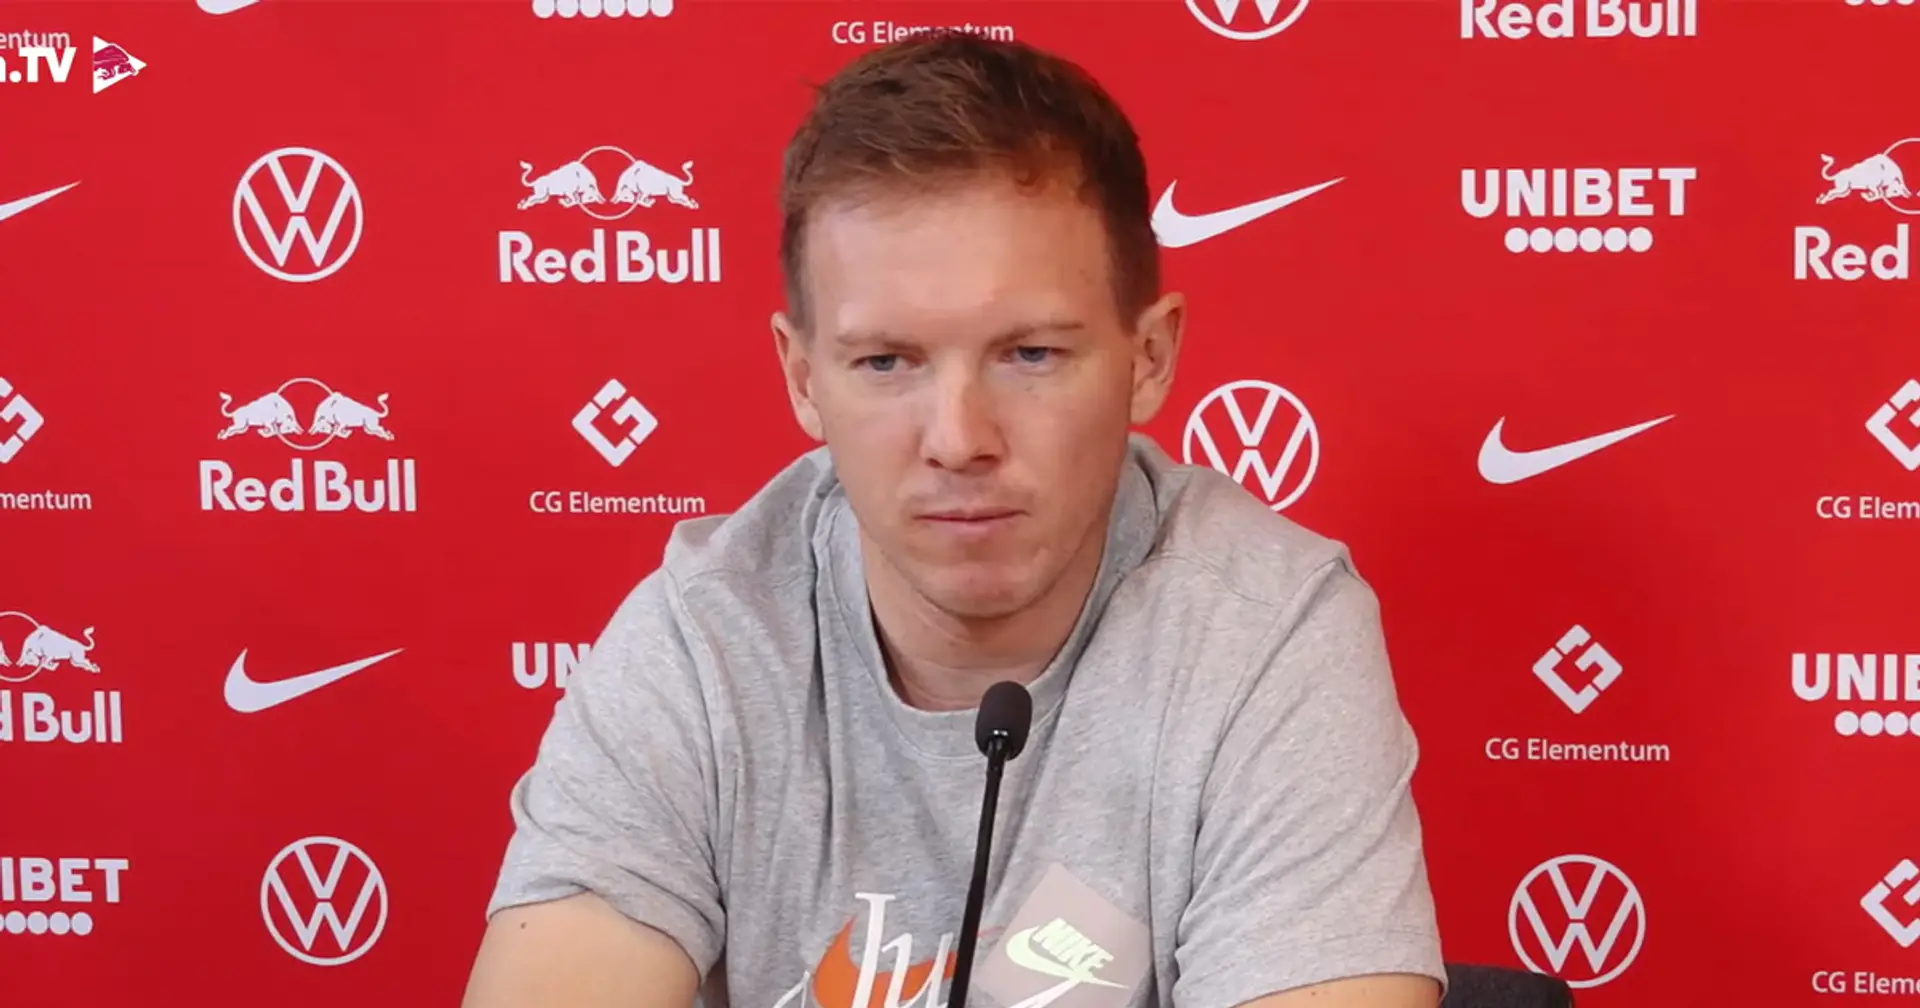 Julian Nagelsmann: 'We wanted some kind of final against Manchester'